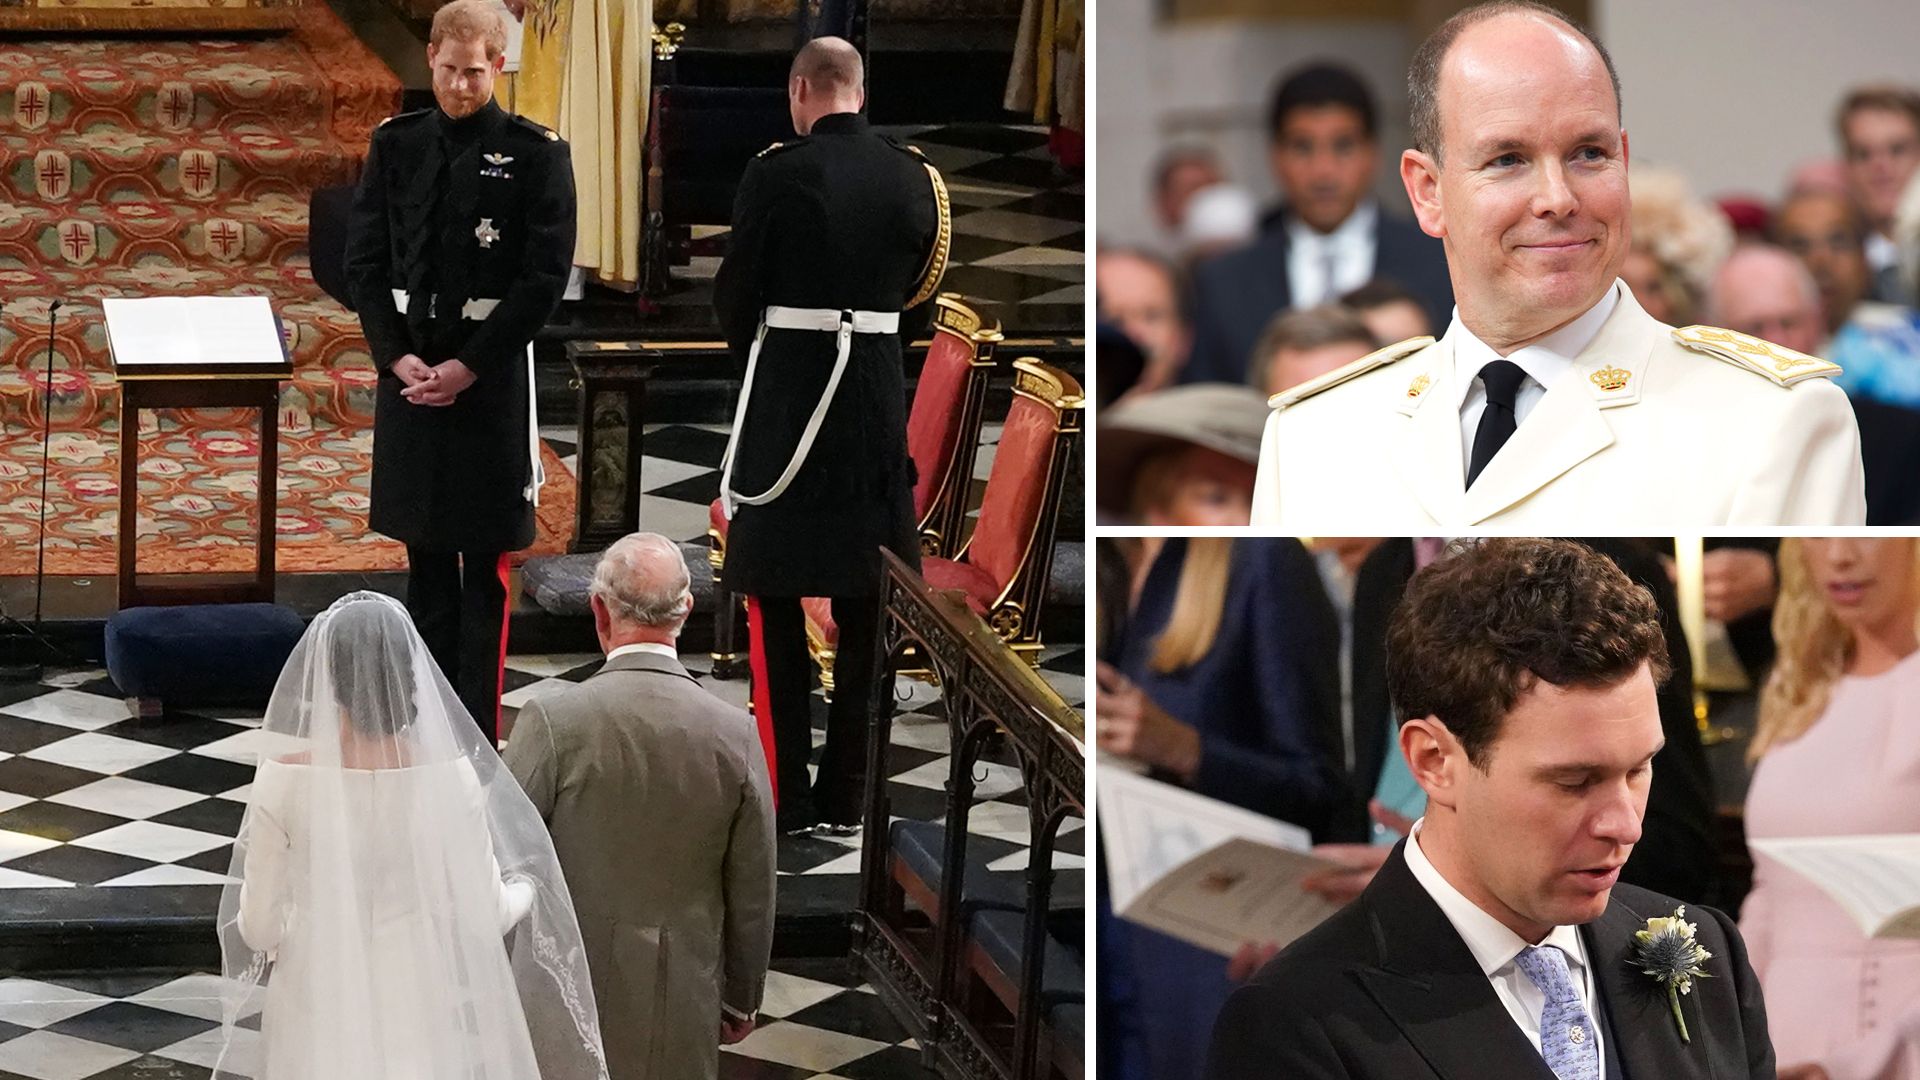 Prince Harry, Prince William and more royal grooms' unfiltered reactions to seeing their brides